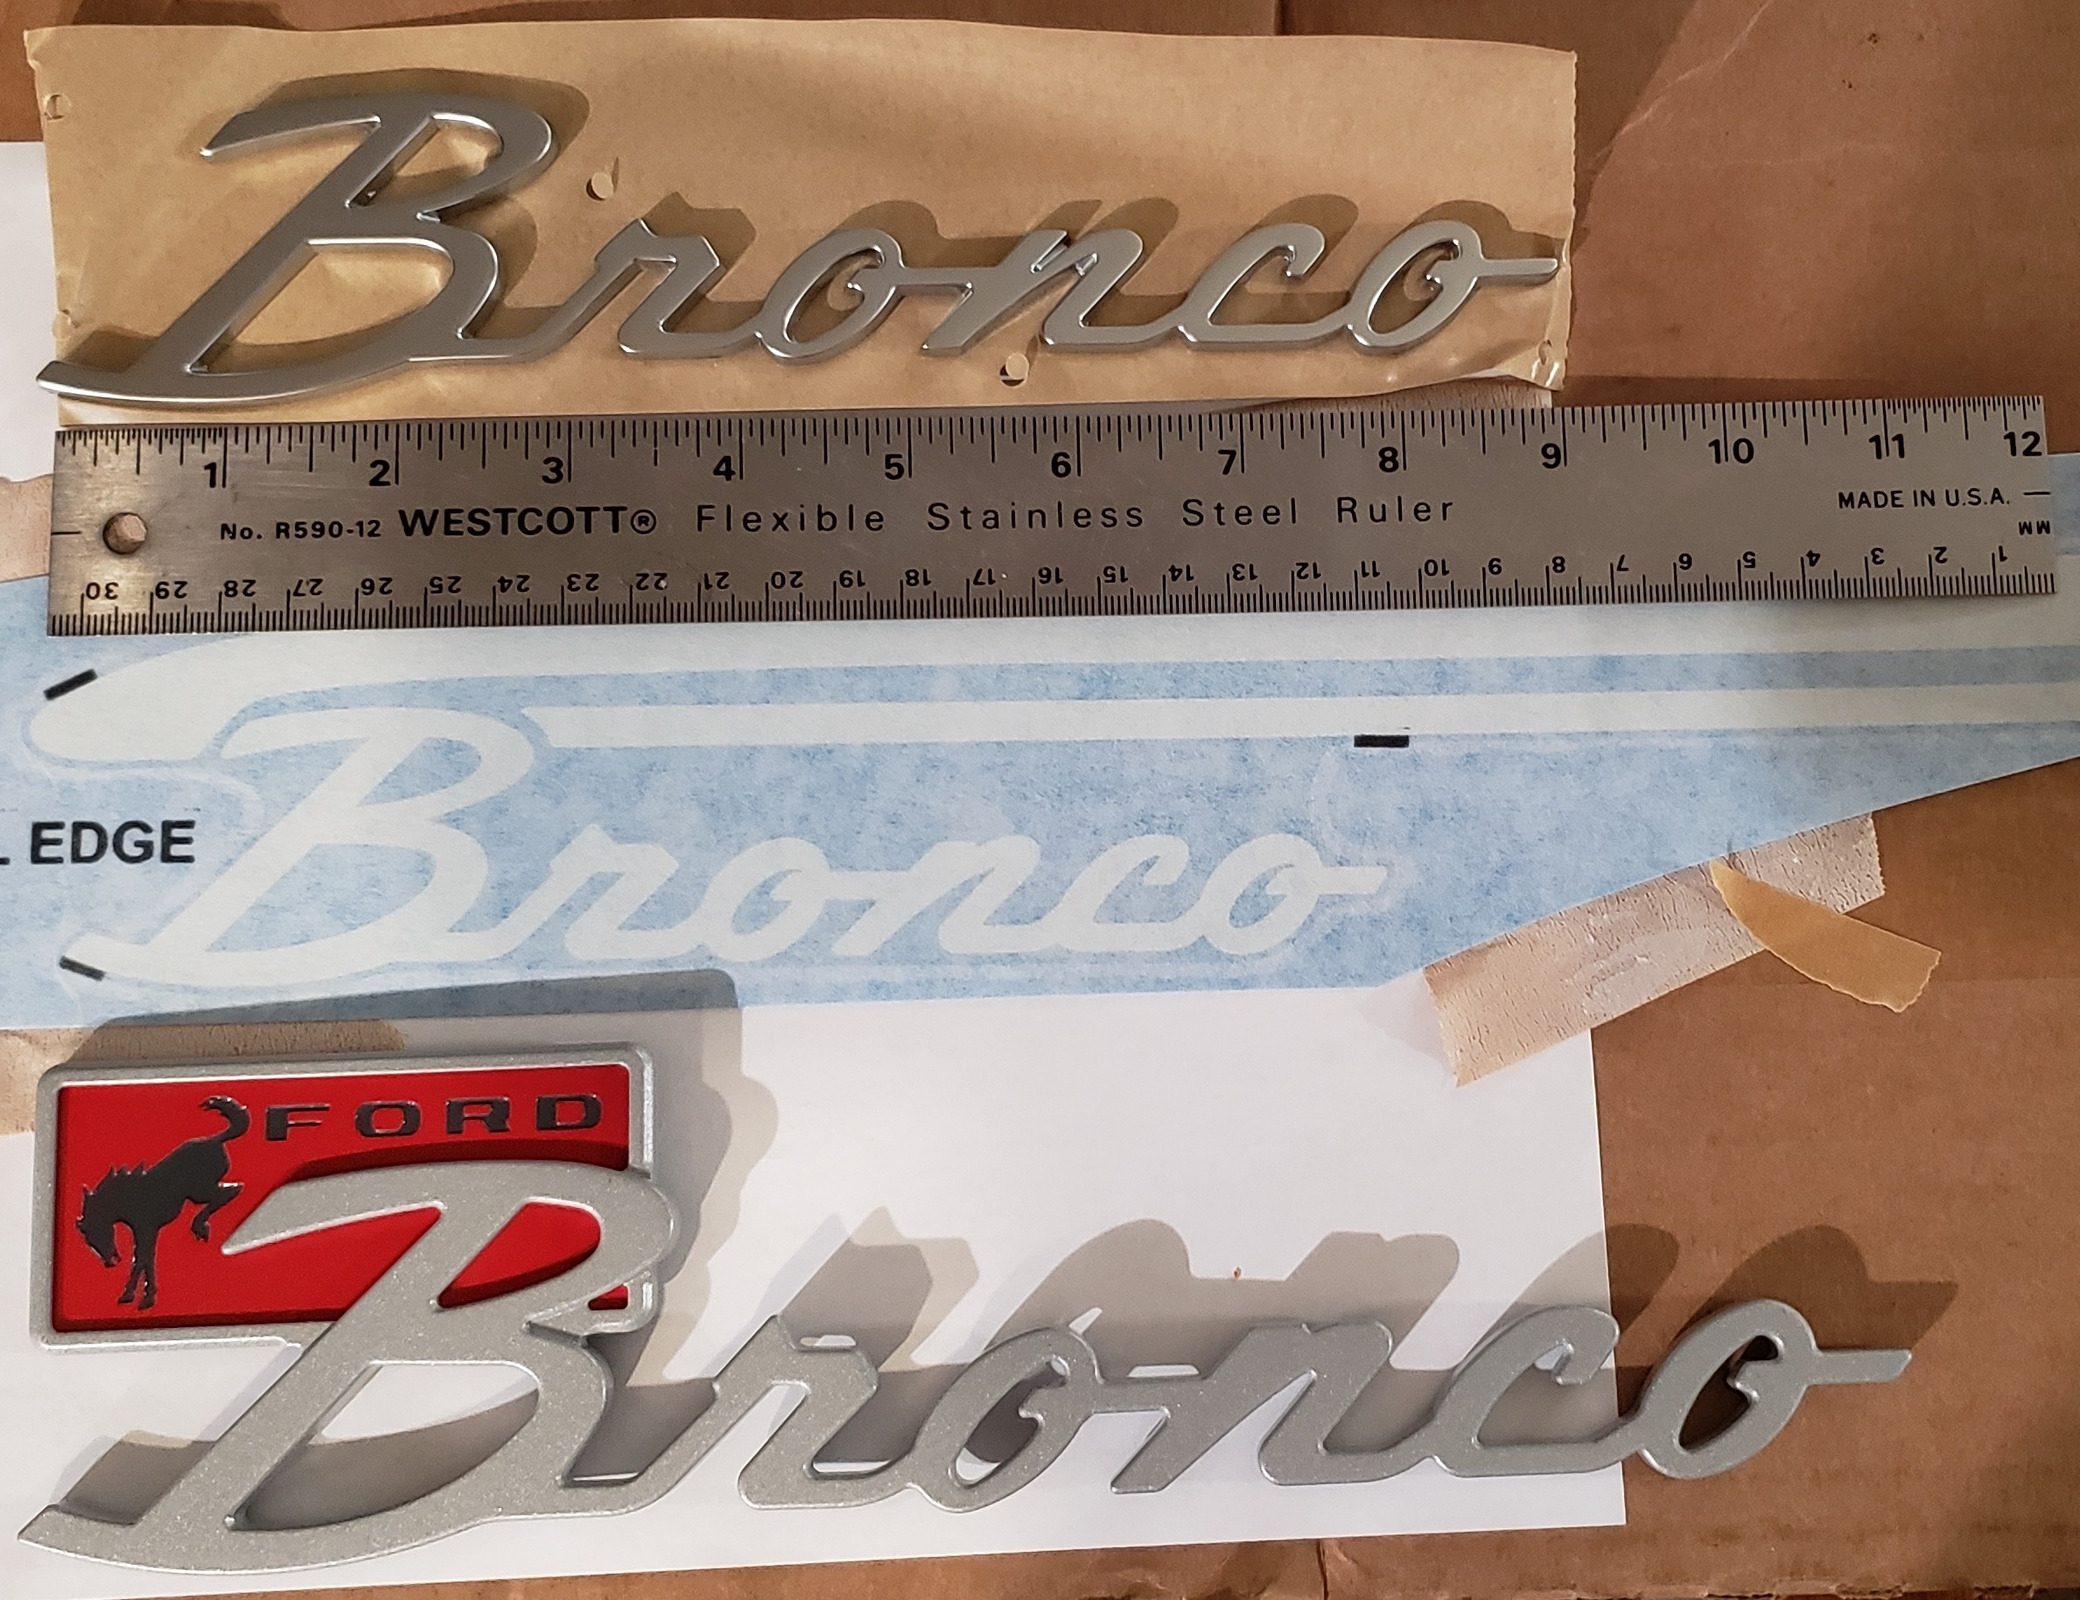 Ford Bronco HERITAGE EDITION Bronco Club 20240401 emblems 1 rotated